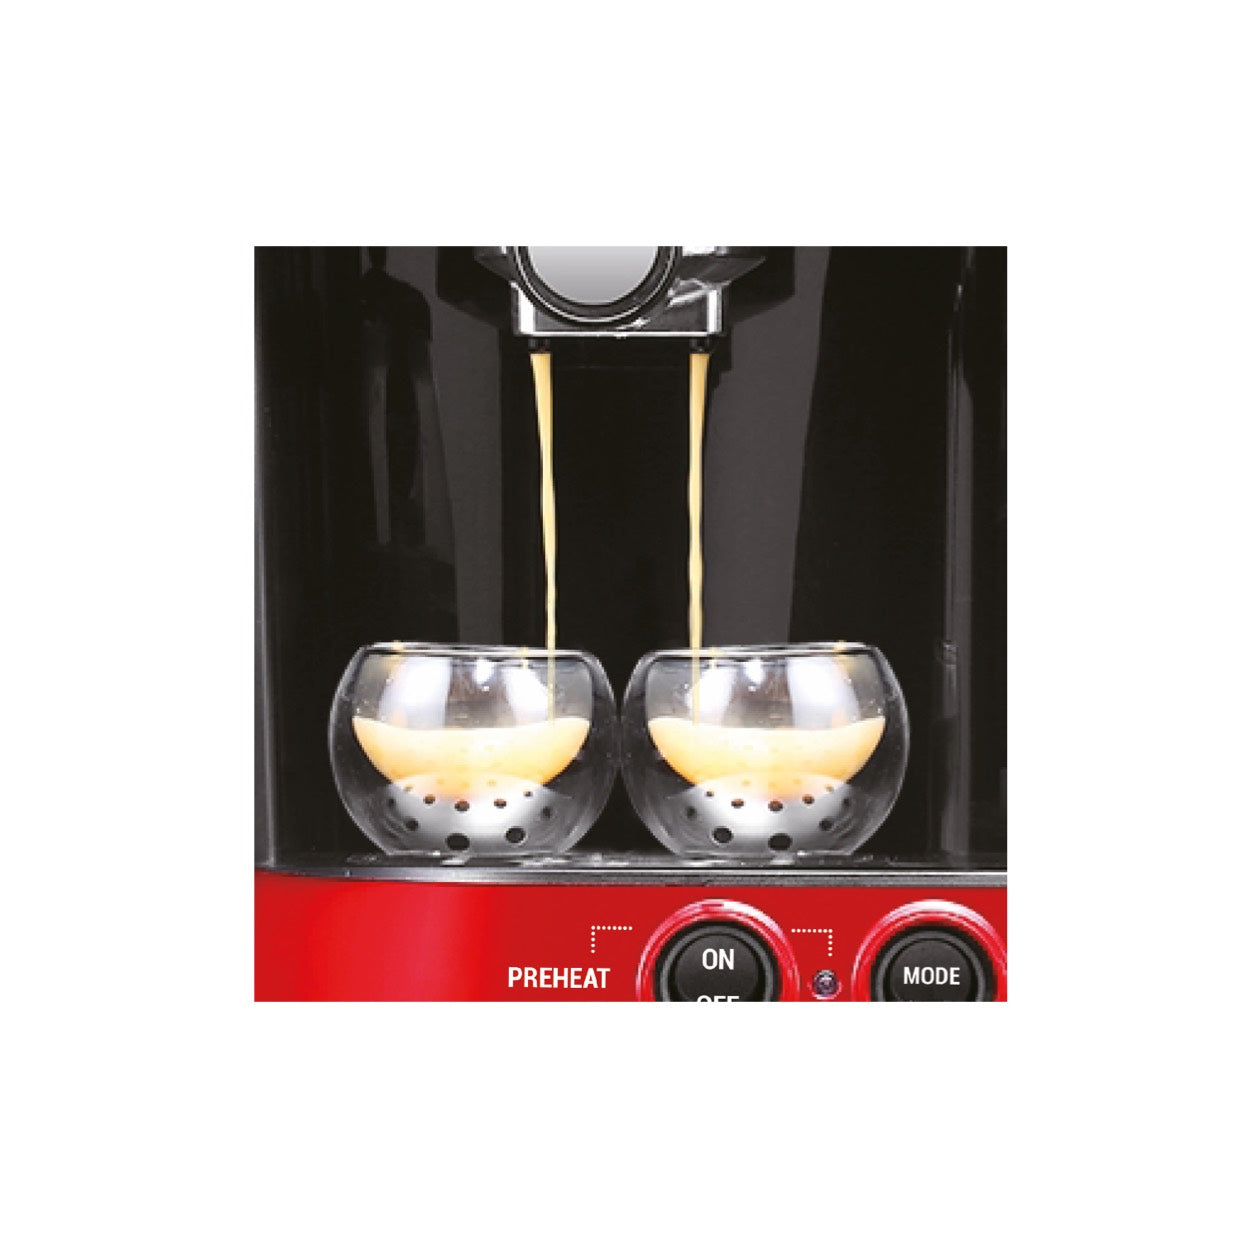 2-in-1 Espresso & Drip Coffee Machine with Milk Frother